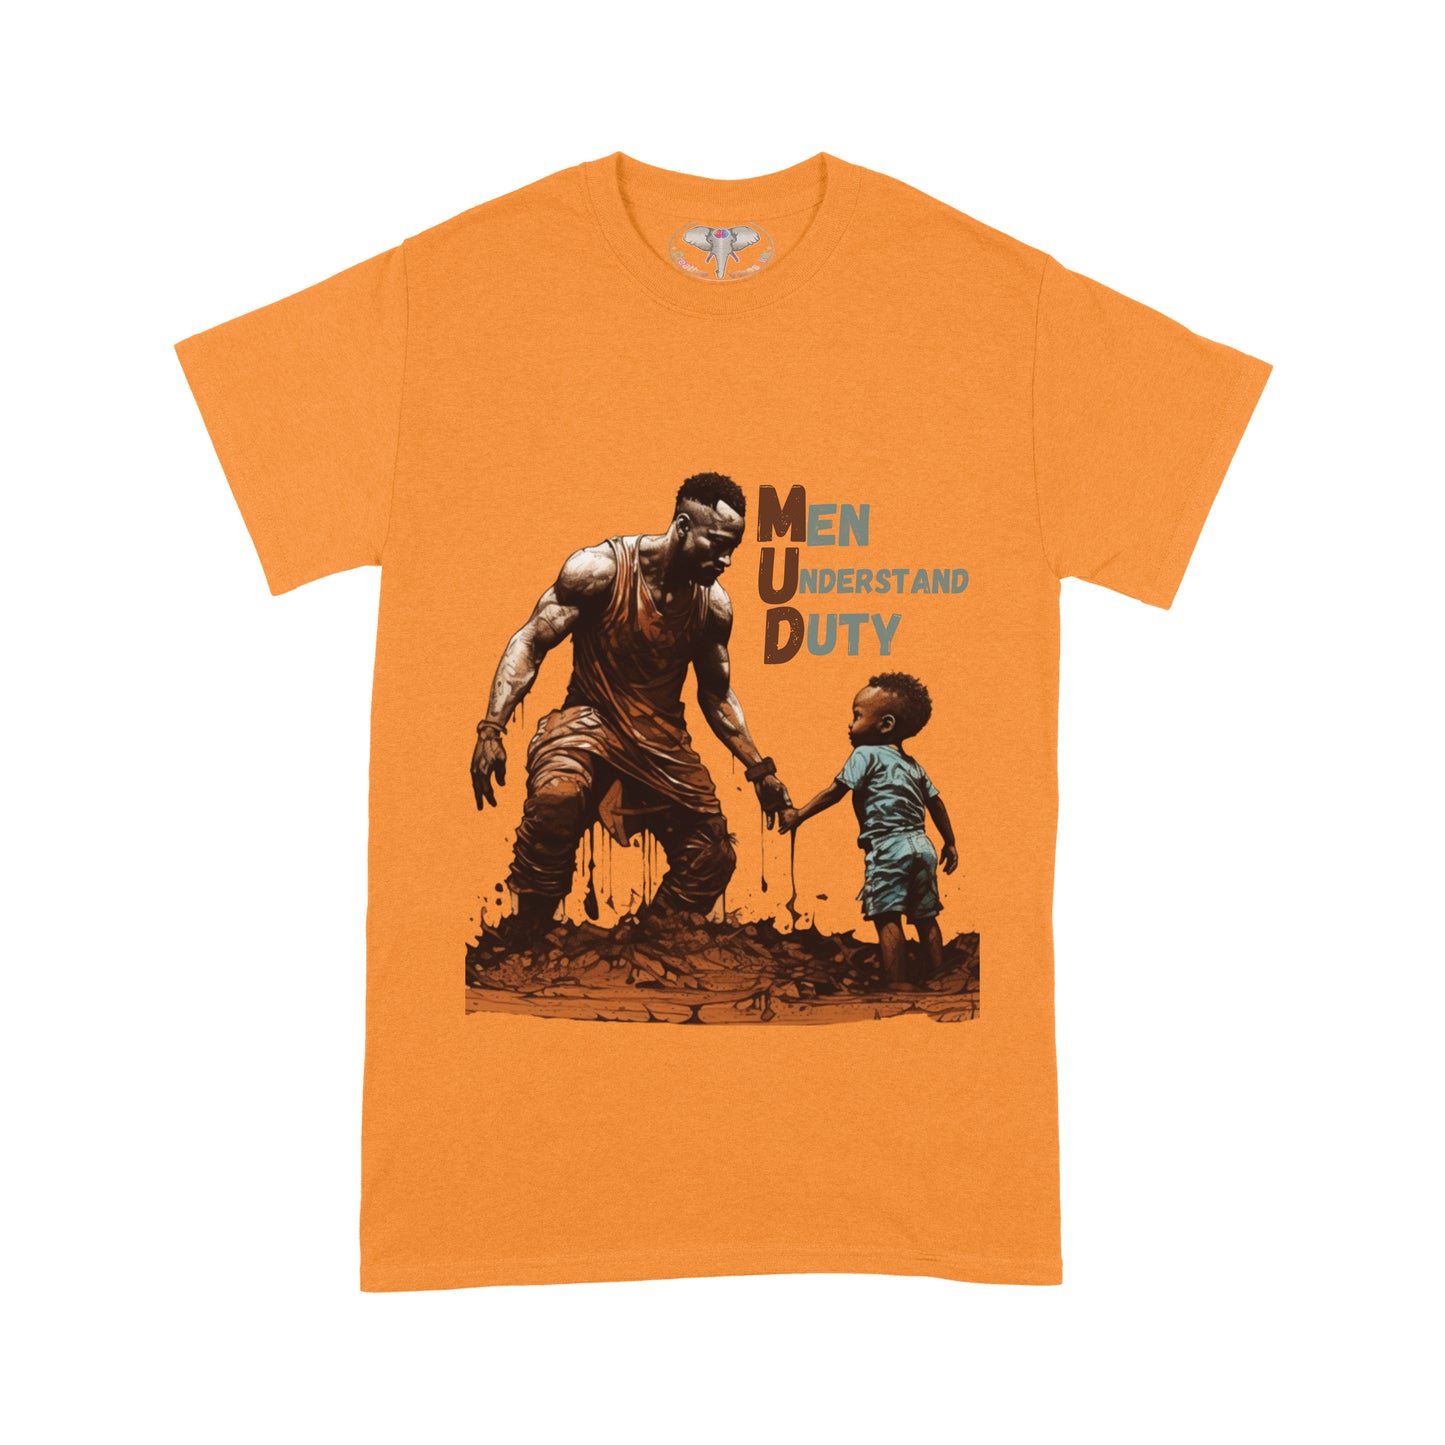 M.en U.nderstand D.uty Graphic T-shirt (Father's Day)